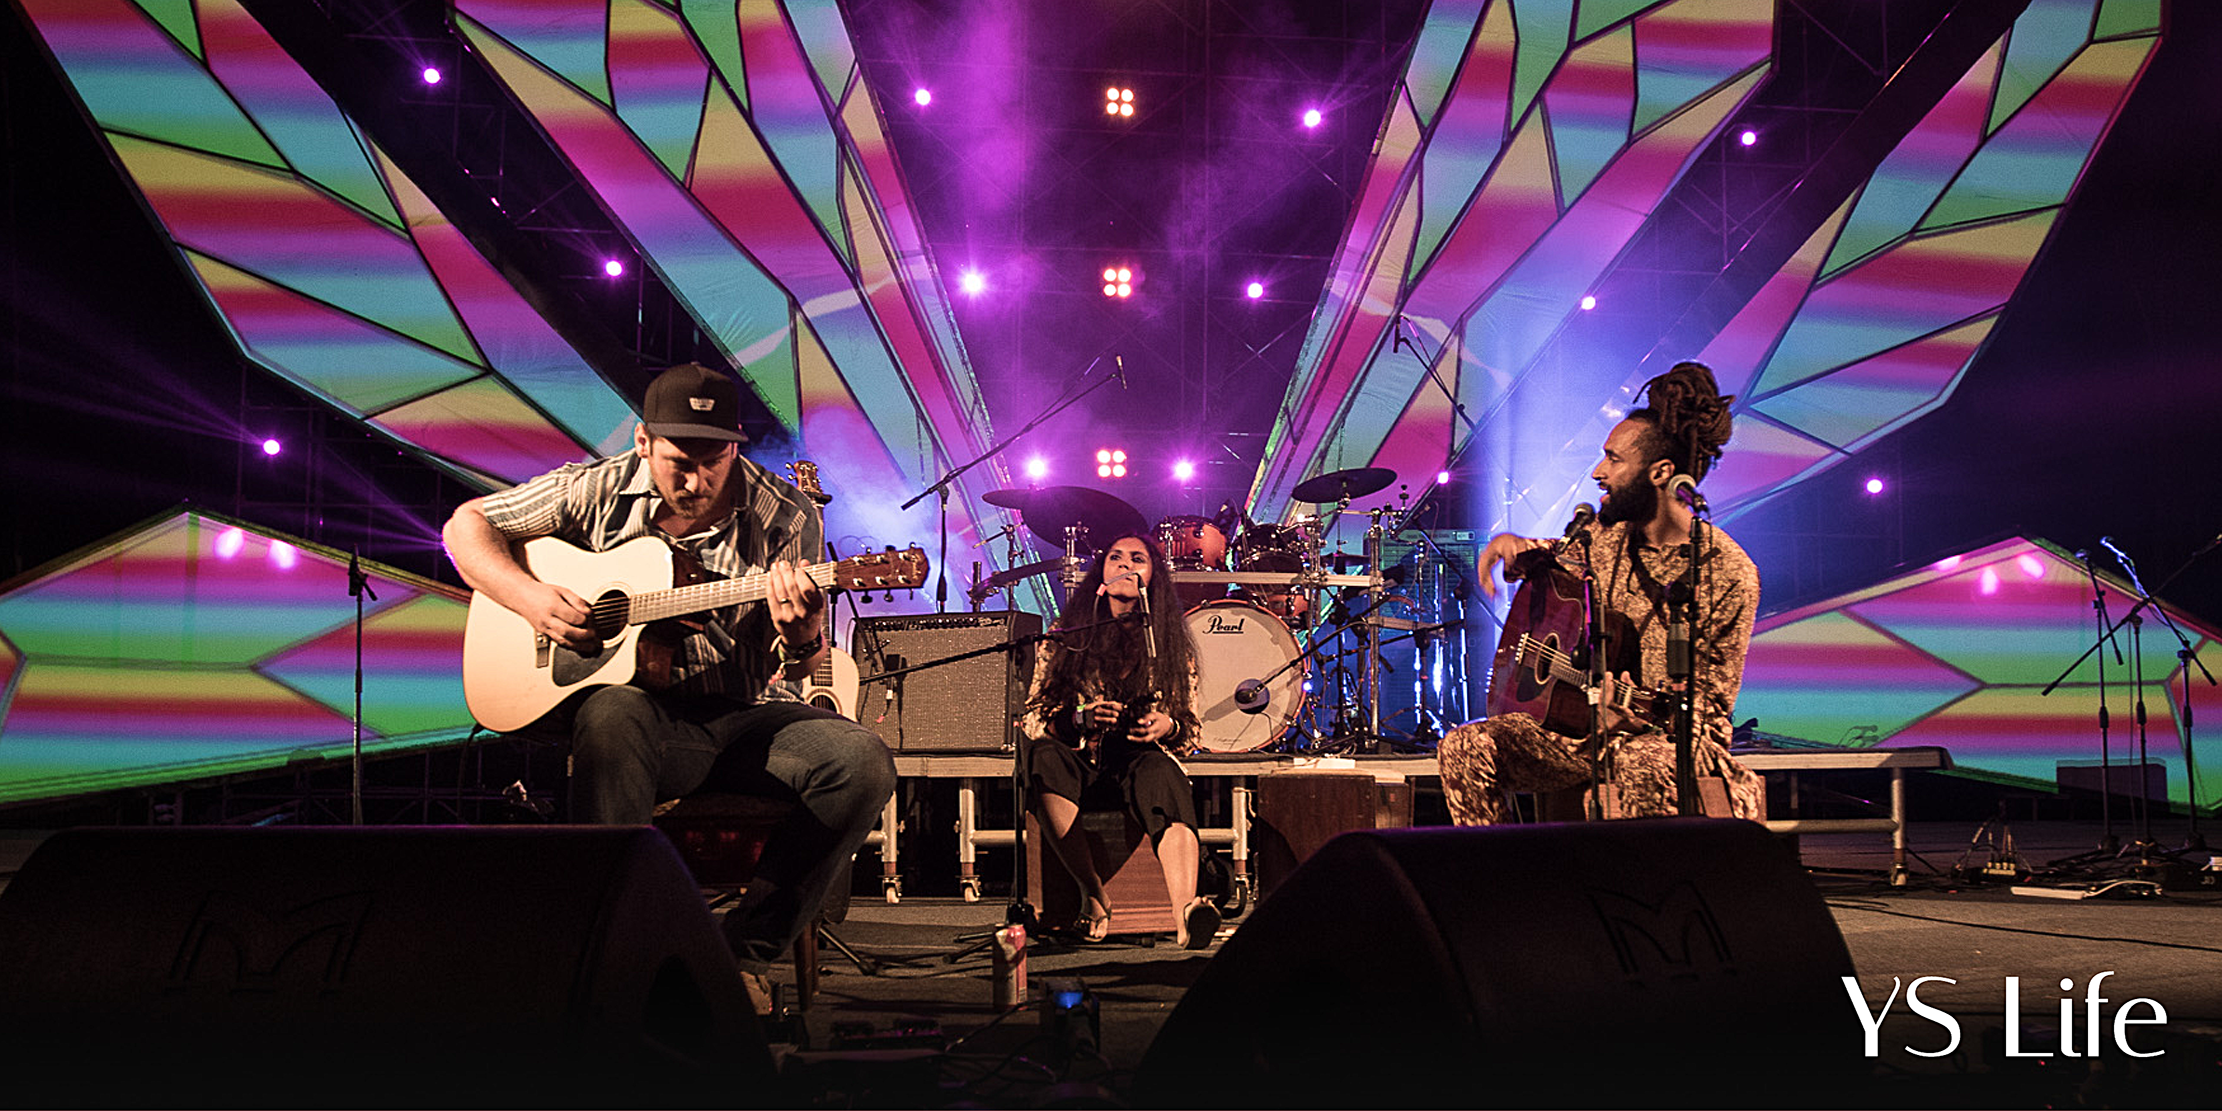 What makes Echoes of Earth India’s greenest music festival?